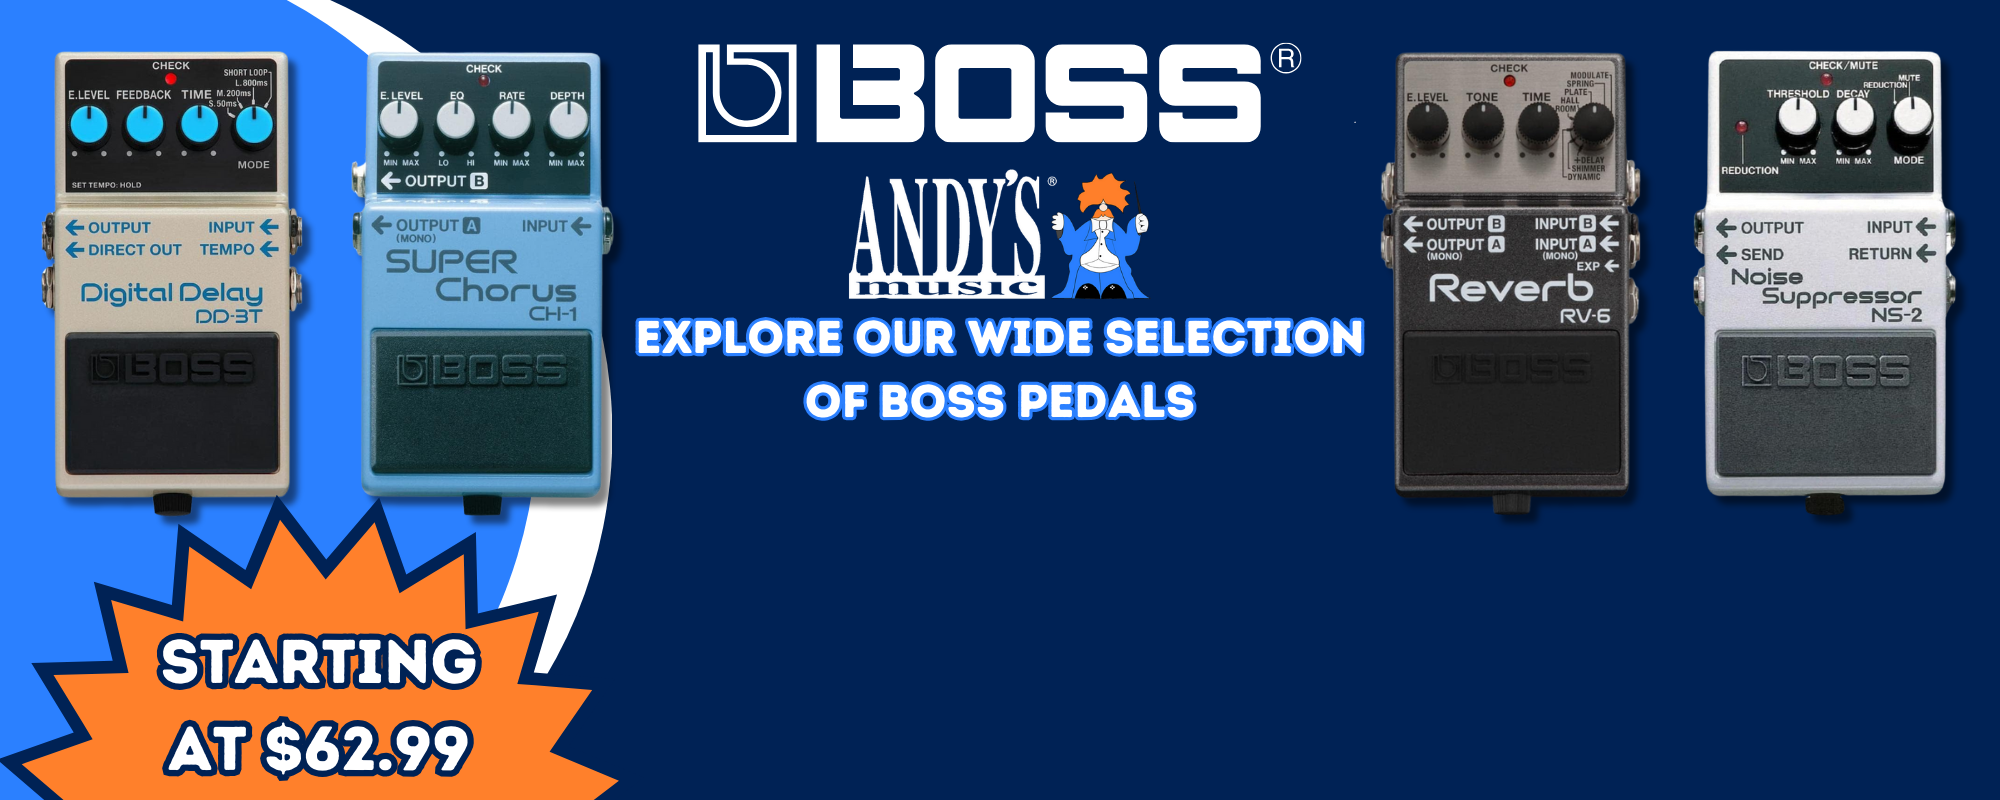 BOSS GUITAR EFFECTS PEDALS at AndysMusic.com